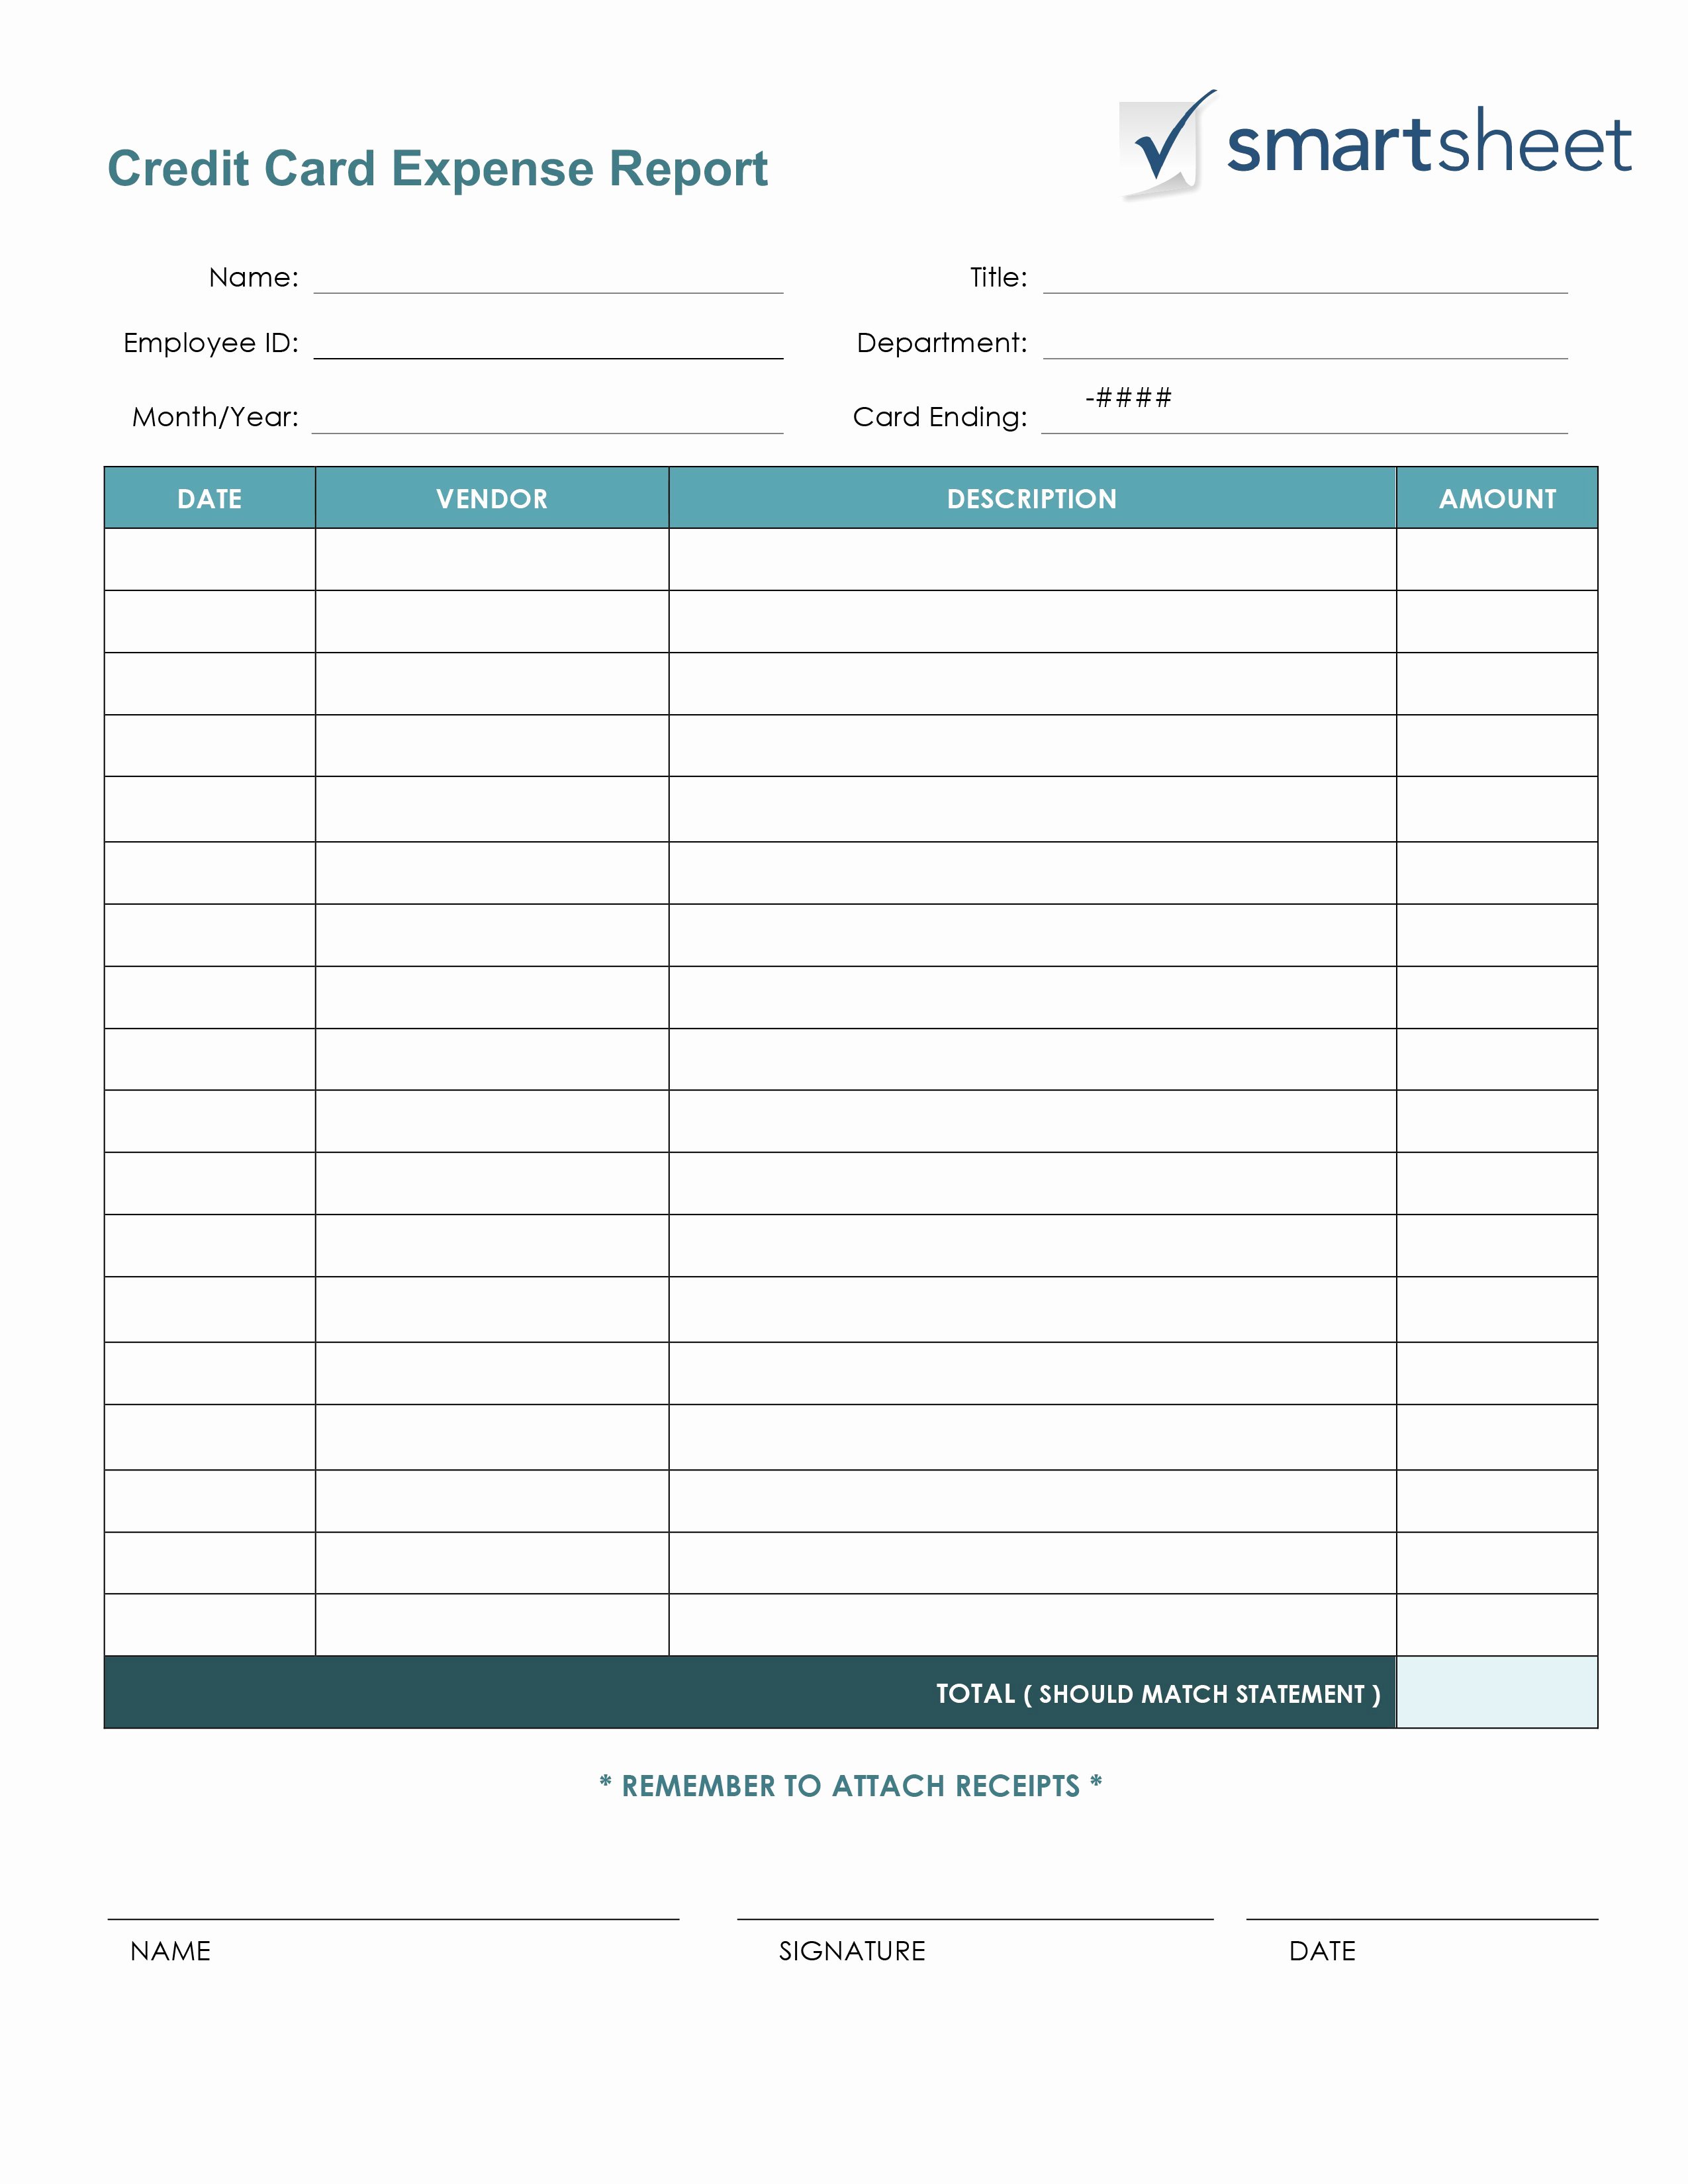 Excel Expense Report Template Free Beautiful Free Expense Report Templates Smartsheet